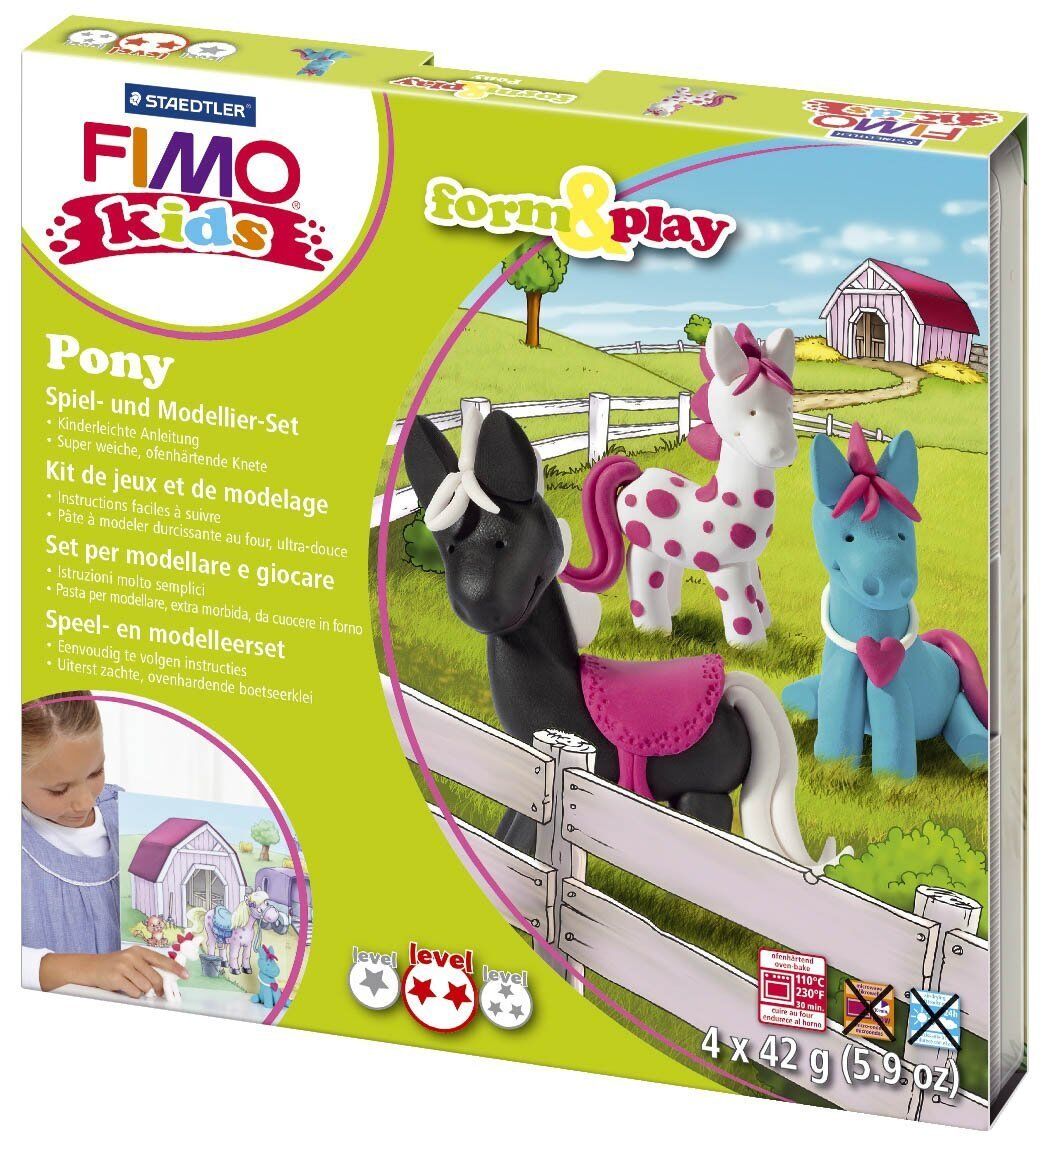 Modelliermasse FIMO Kids Materialpackung Form & Play "Pony", 4 x 42 g